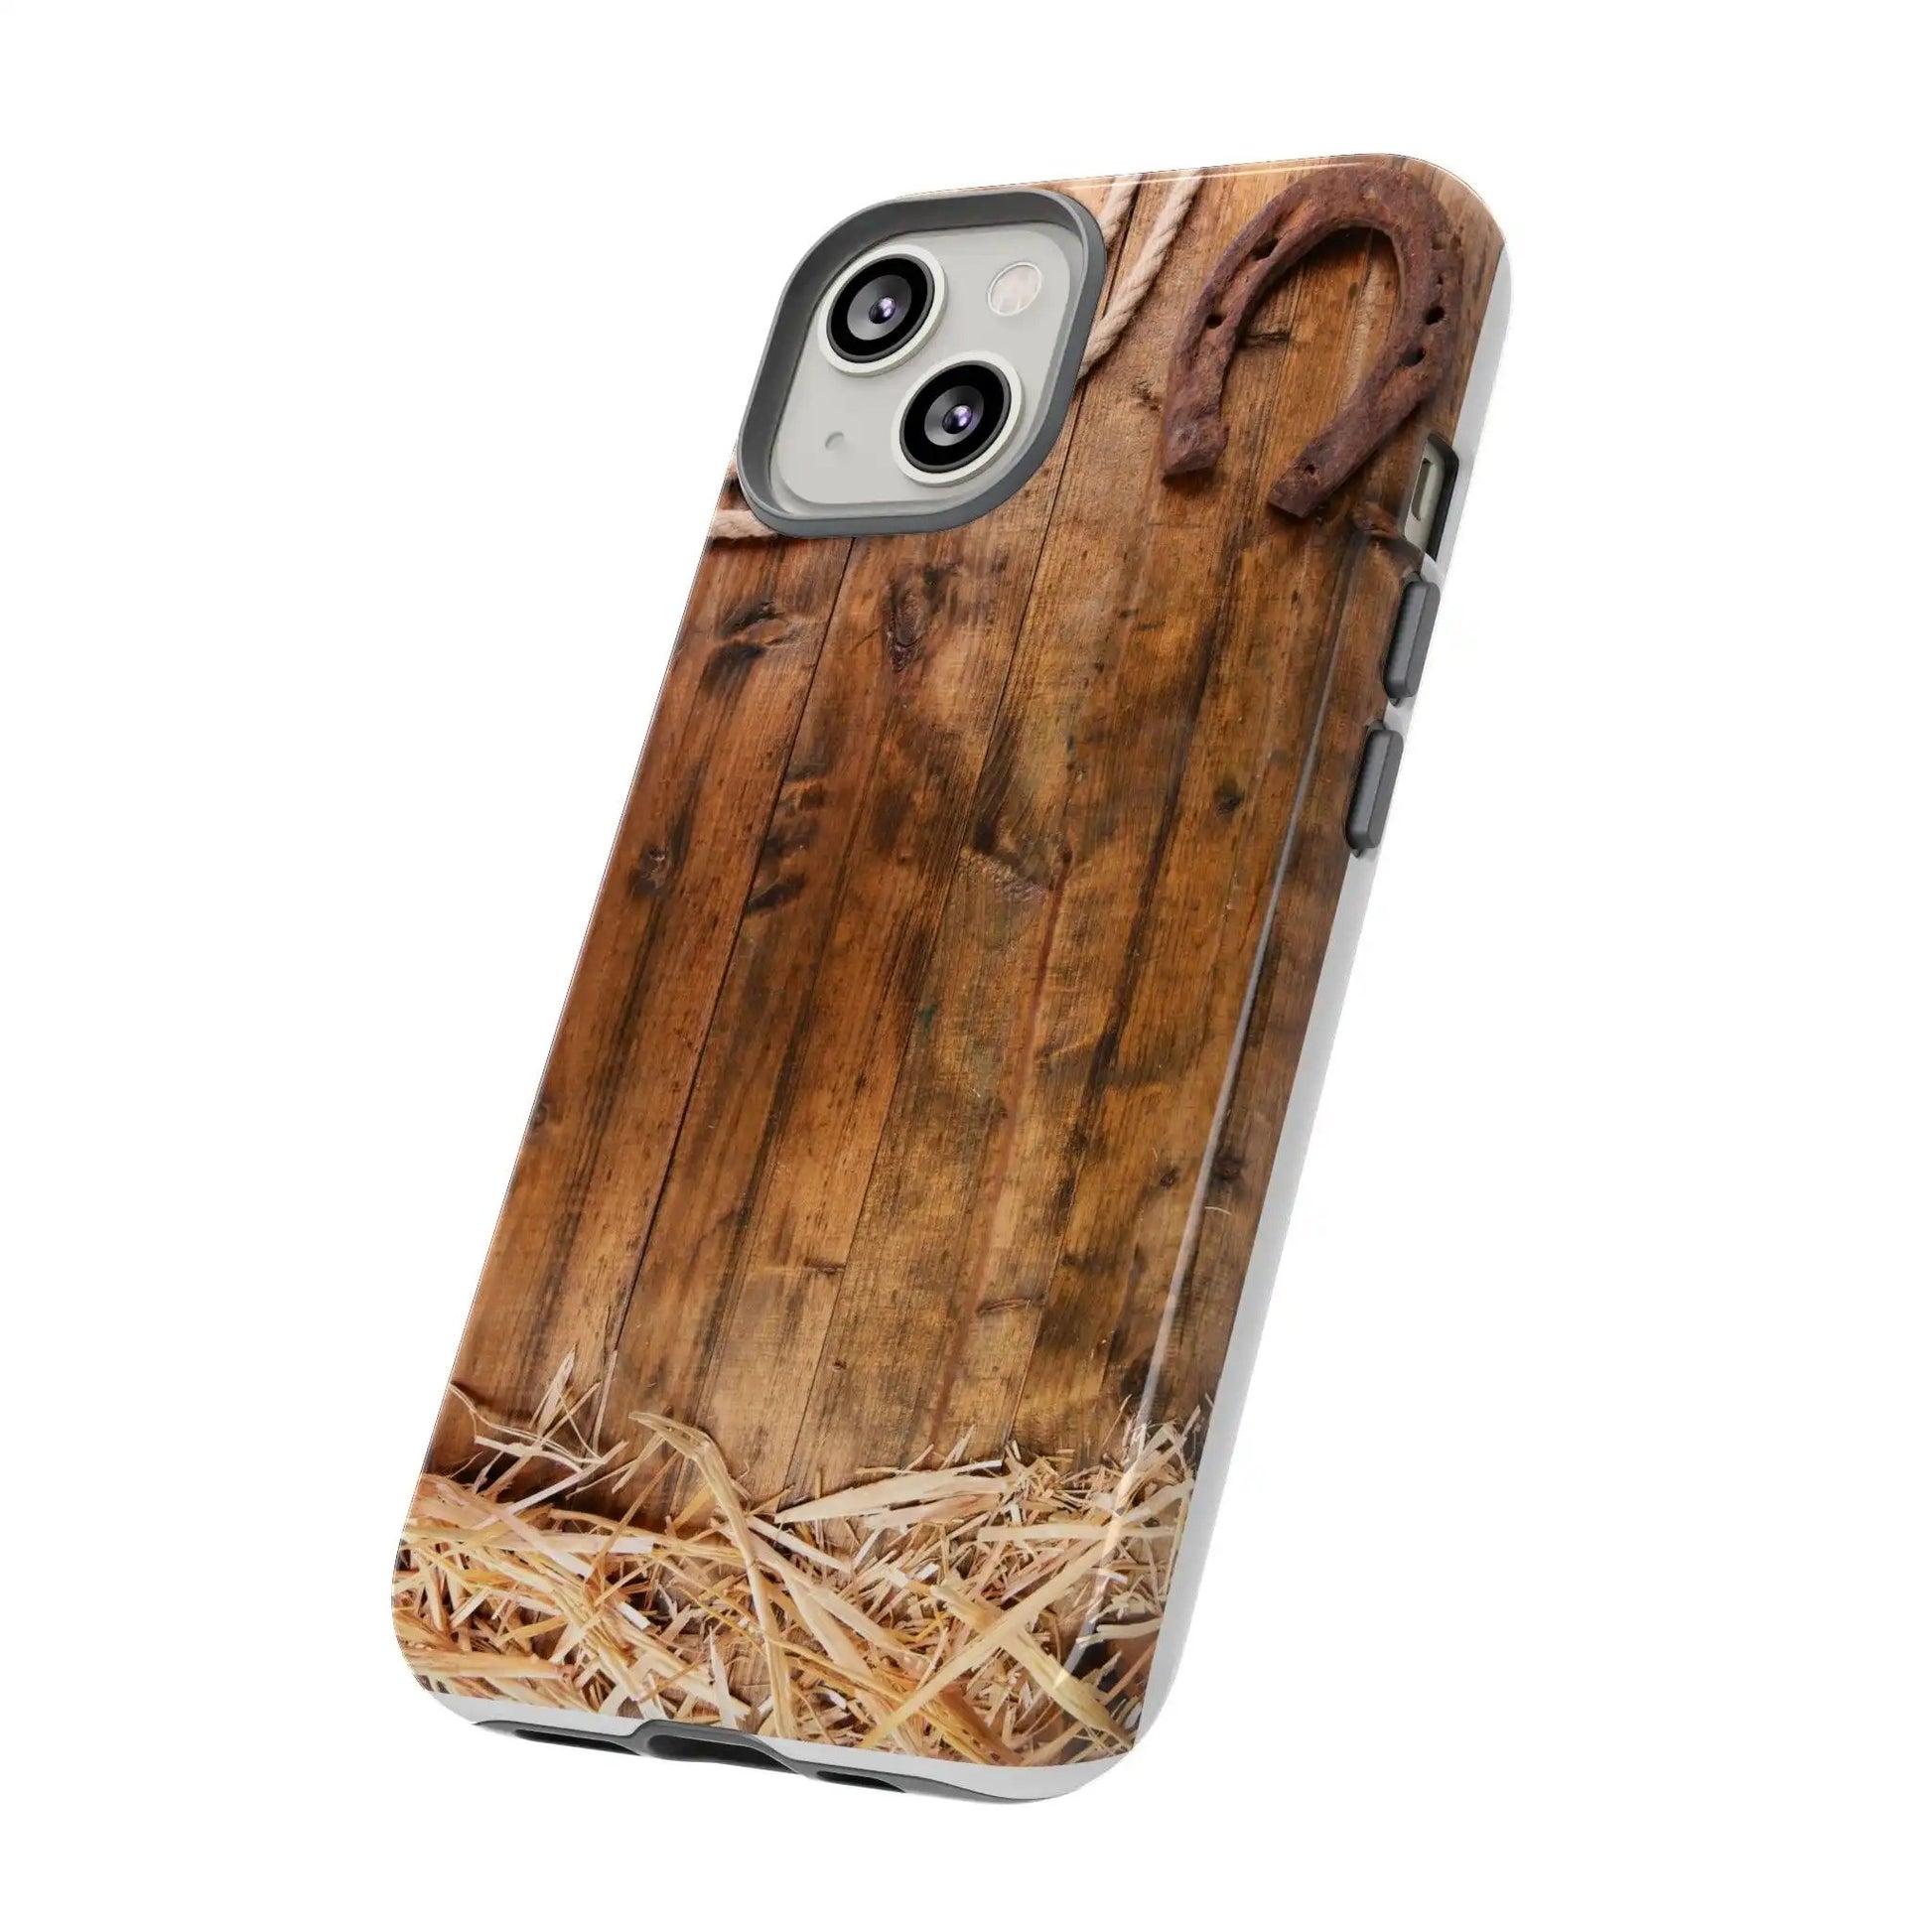 Country Barn Horse Tough CasesPersonalize Apple iPhone, Samsung Galaxy, and Google Pixel devices with premium-quality custom protective phone cases. Every case has double layers for extra durabilCountry Barn Horse Tough CasesThe Hufeisen-Ranch (WYO Wagyu)Phone Case